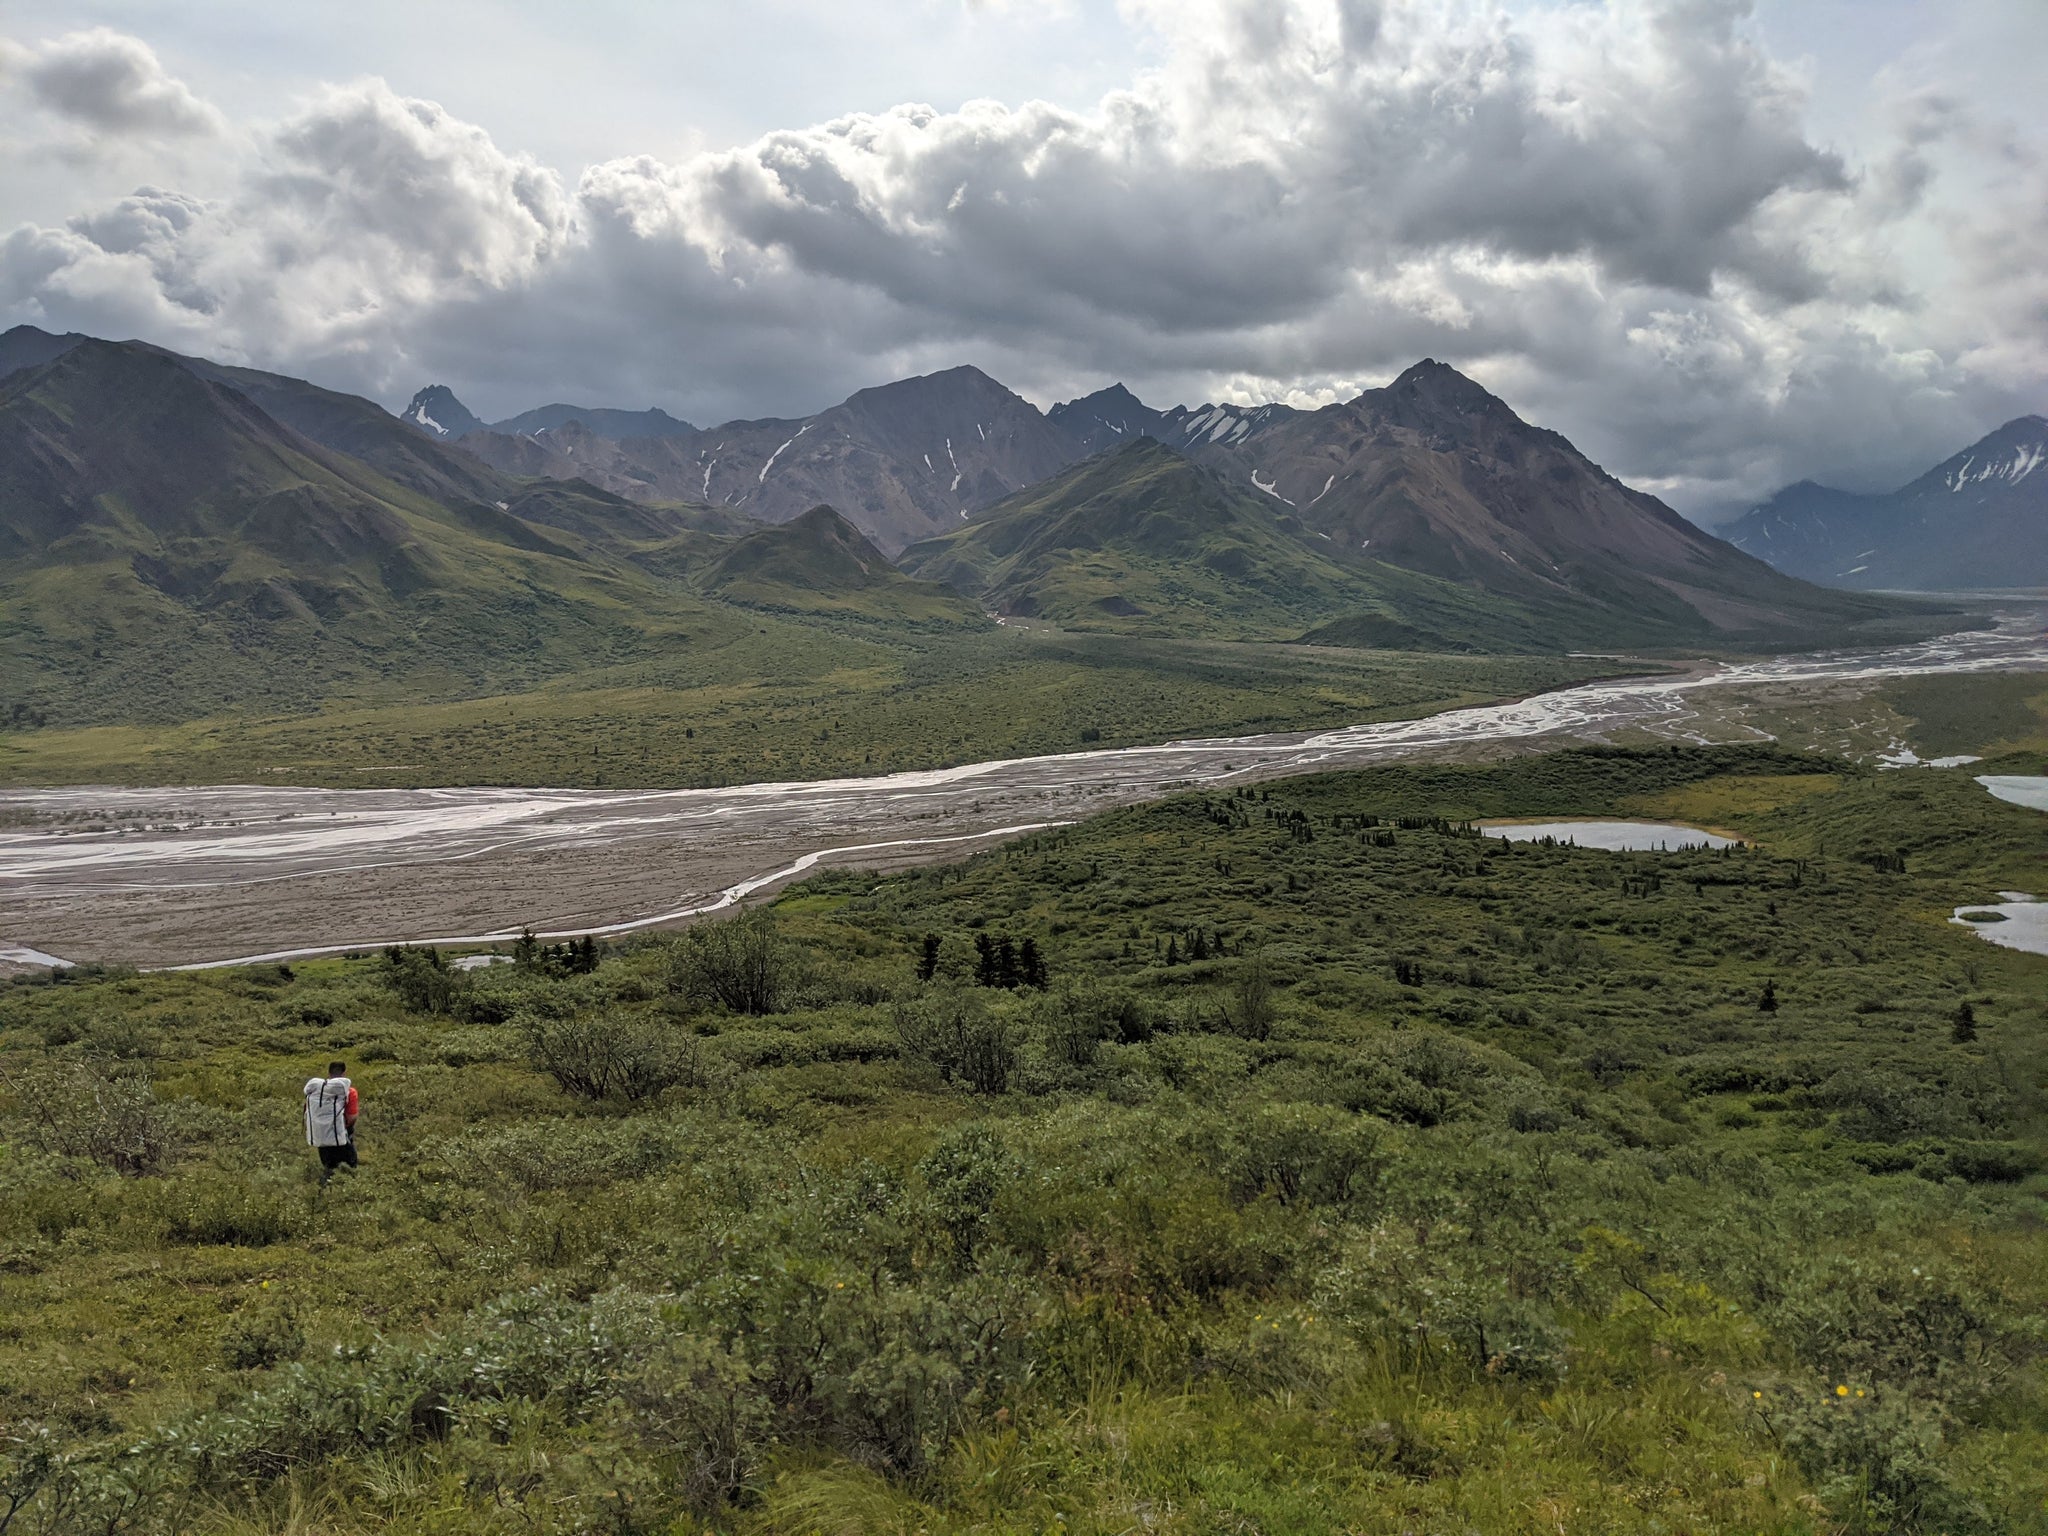 Photography while hiking in Denali National Park